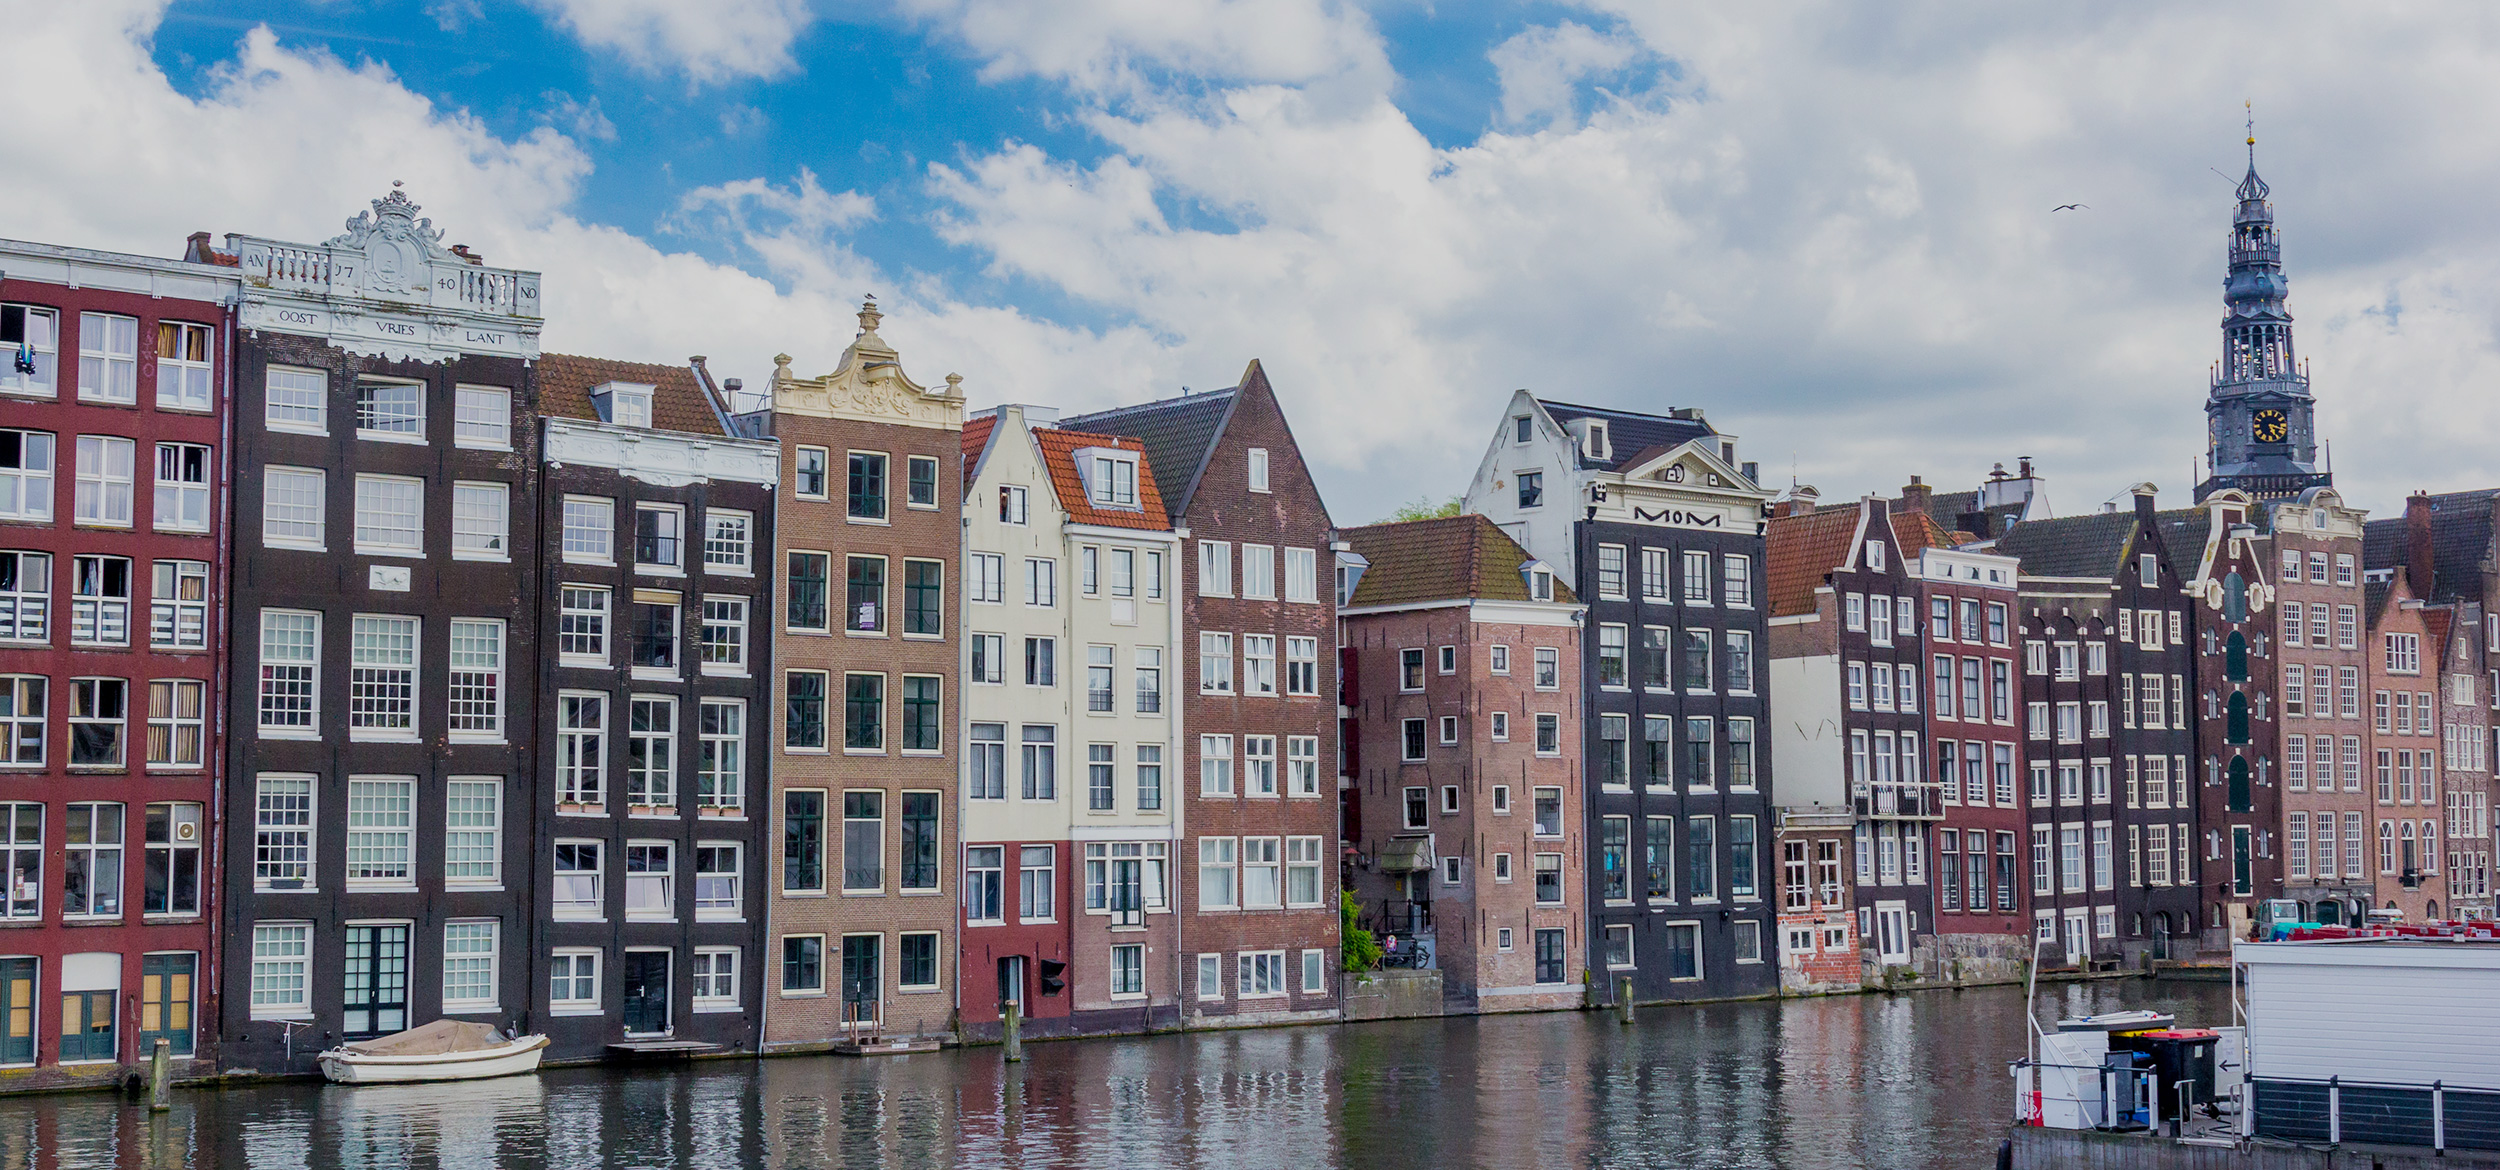 Colorful row of old Dutch houses reflected in a canal in Amsterdam in the Netherlands